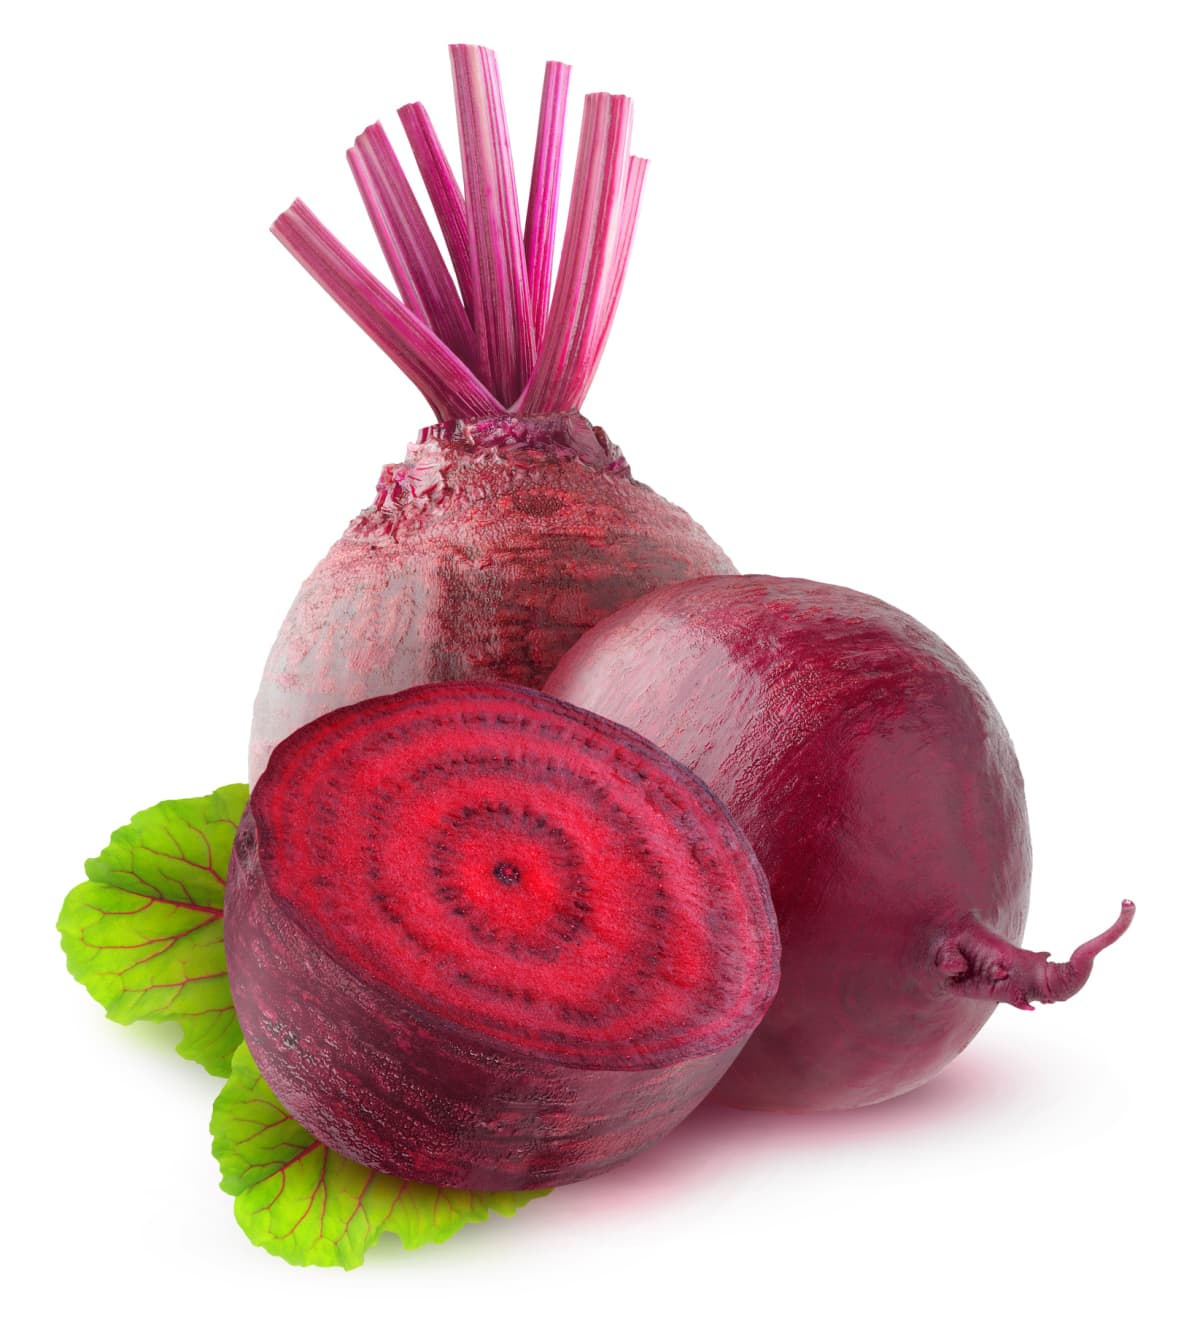 beets on white background, larger files come with path.